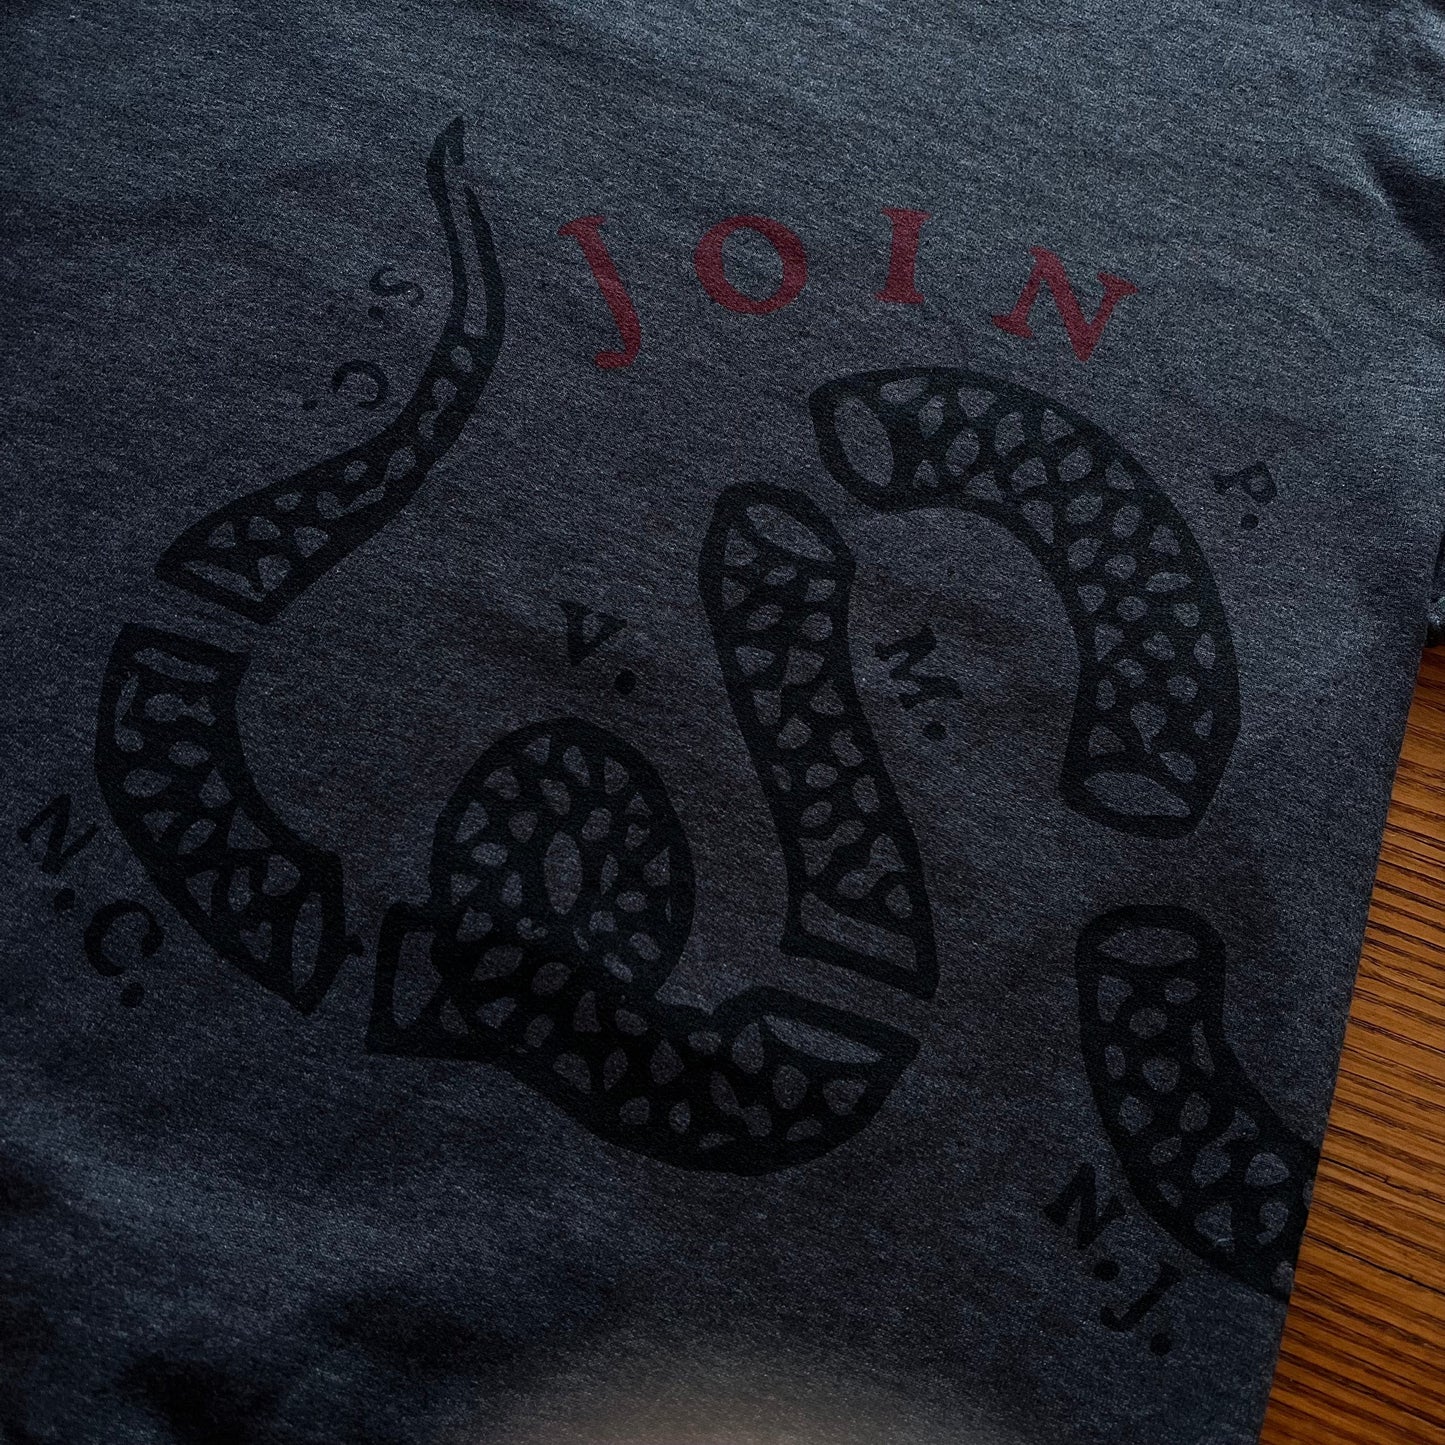 "Join or Die" V-neck shirt -  from the history list store